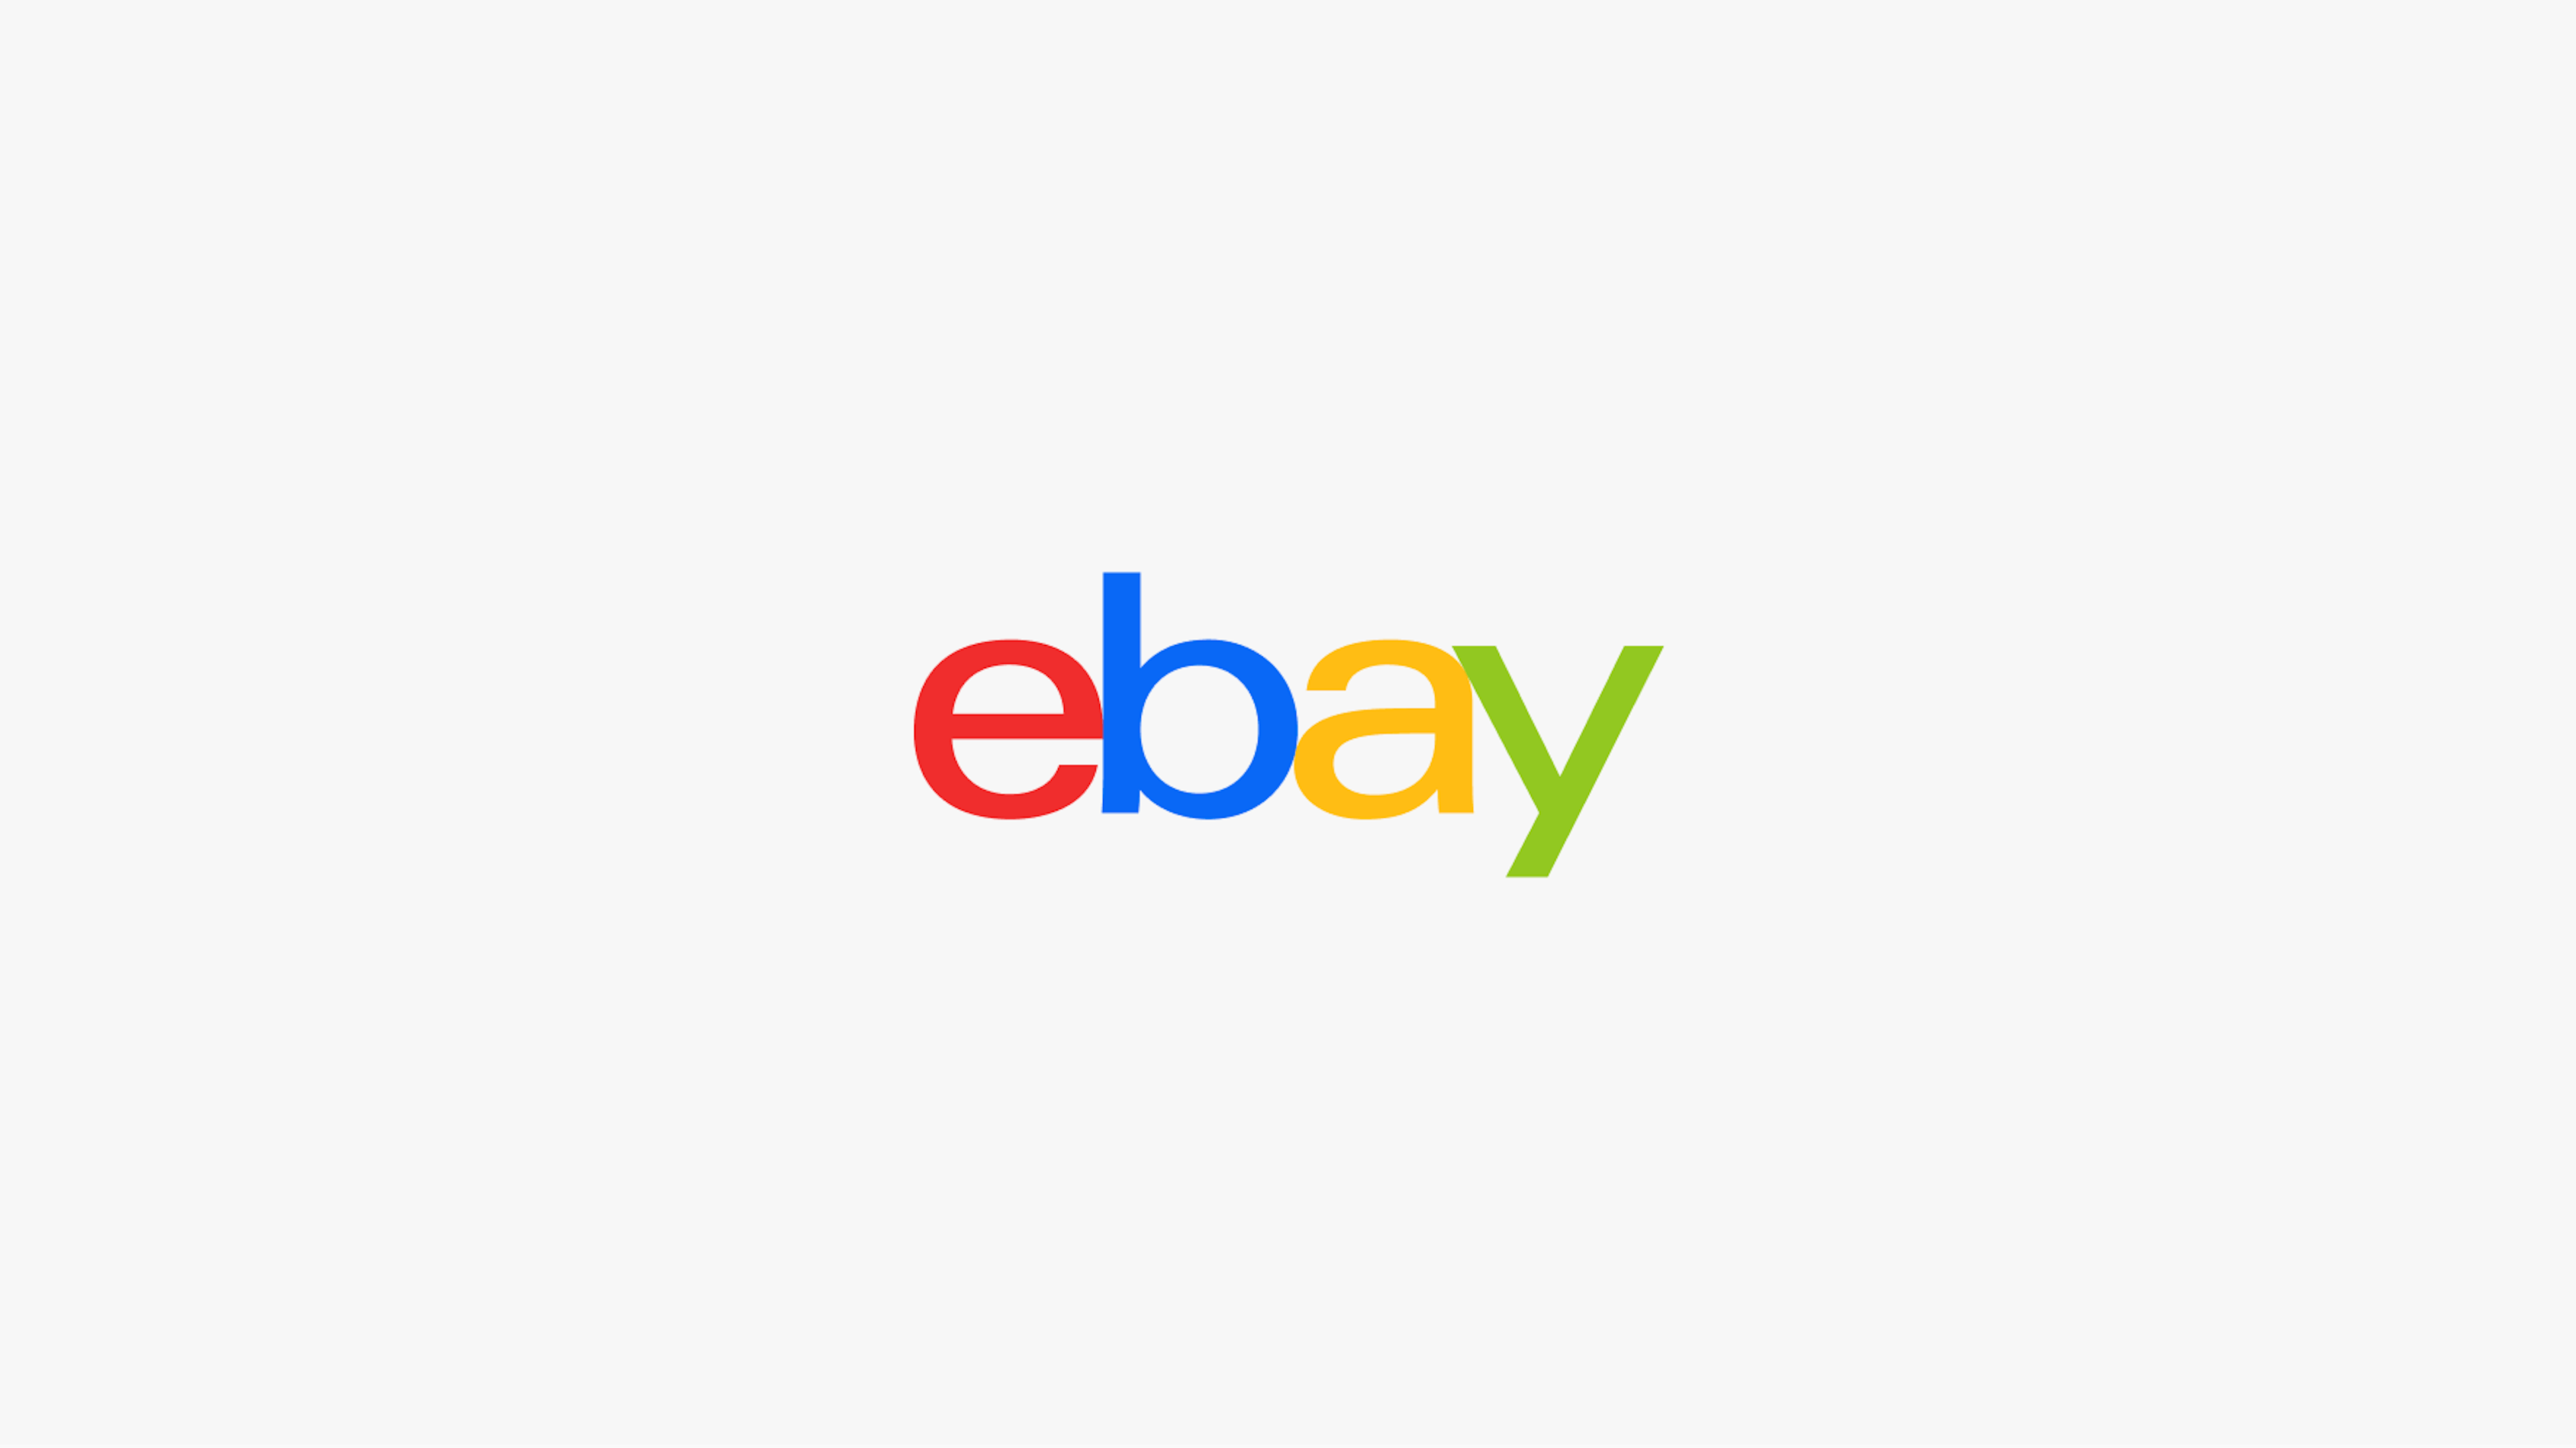 The signature, lowercase, colored eBay logo with red E, blue B, yellow A, and green Y.